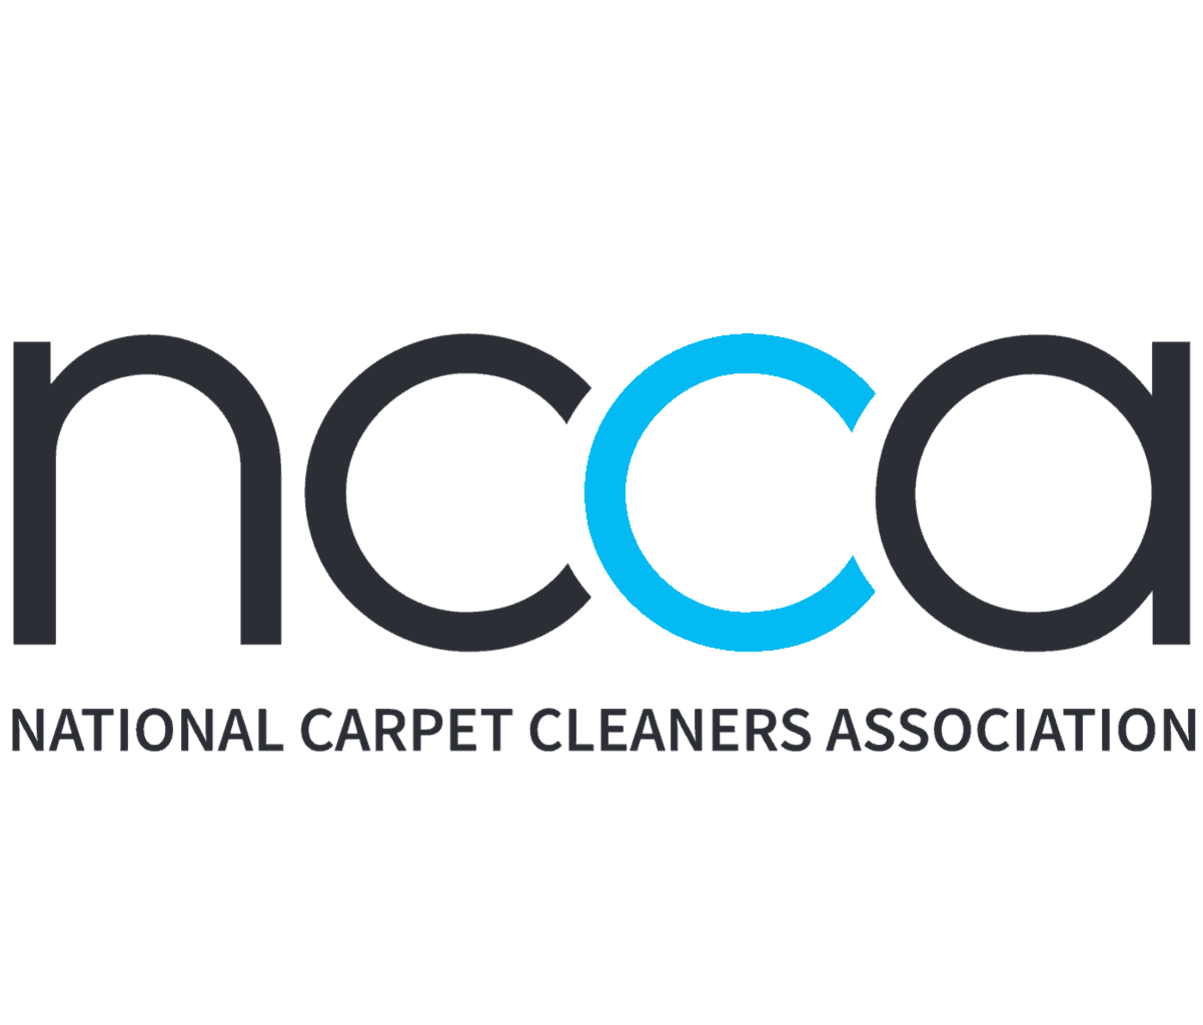 Scimitar Carpets professionally cleaning carpets and upholstery - NCCA member